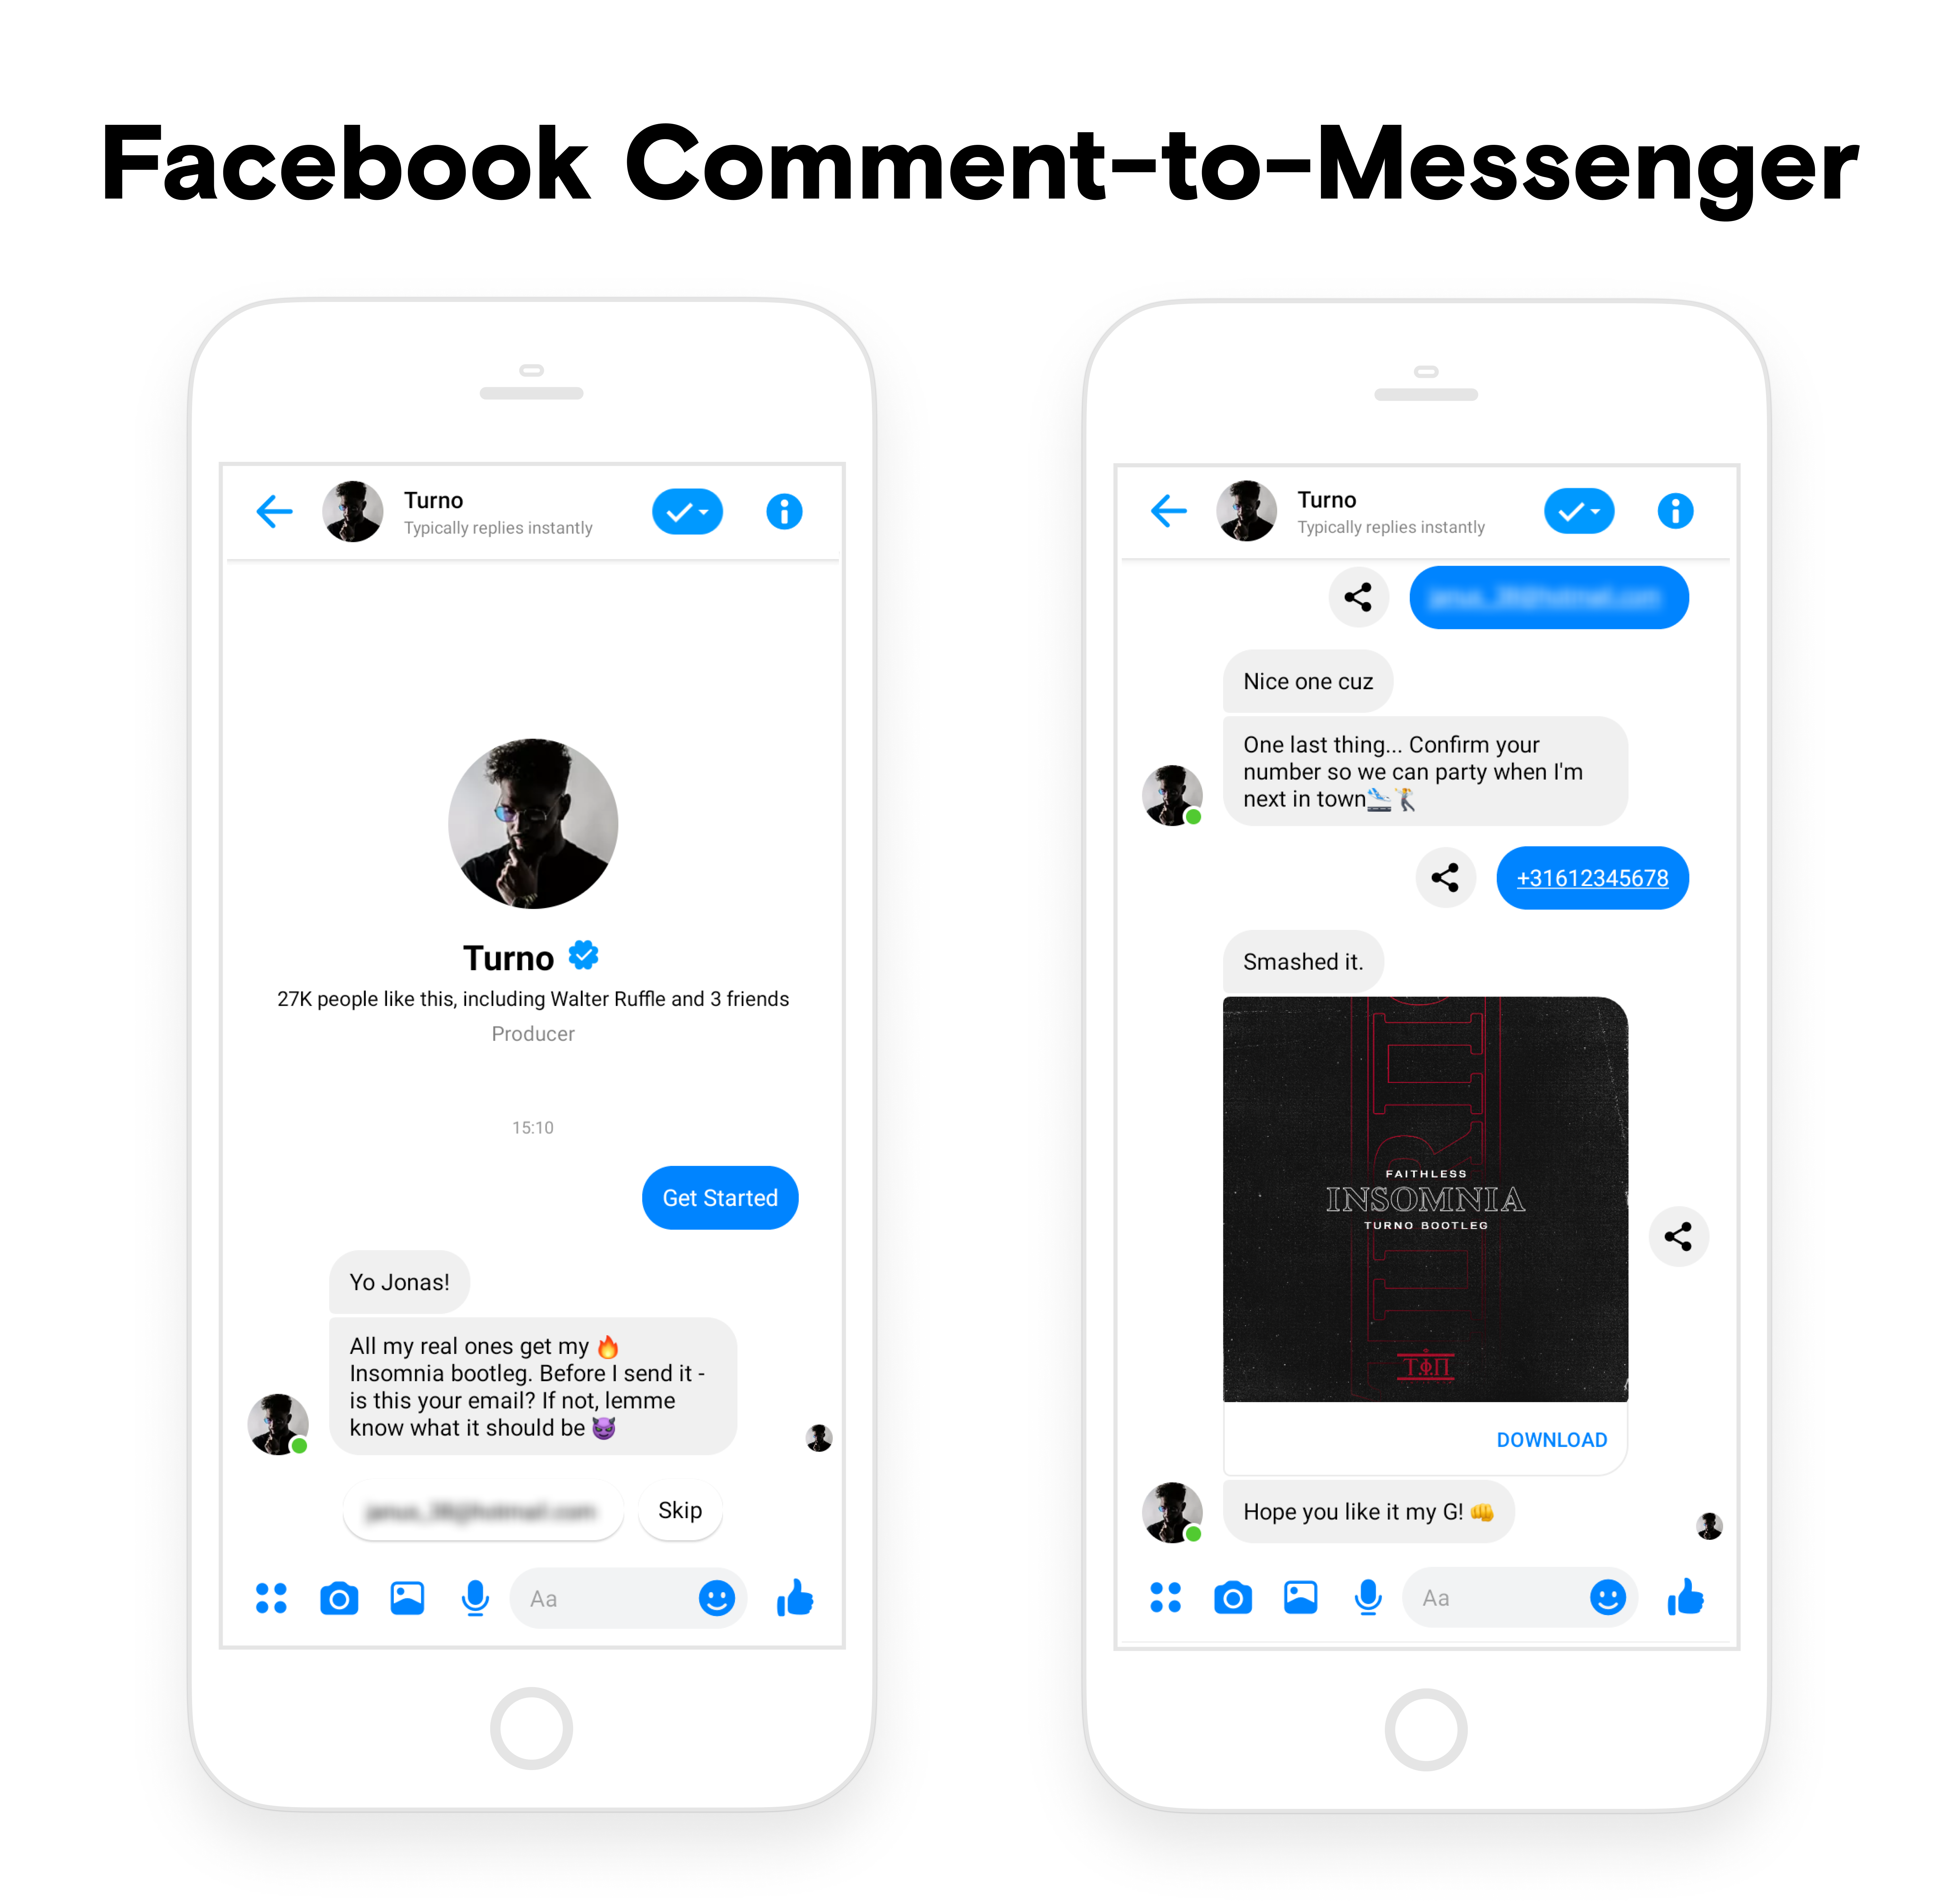 Turno-Comment-to-Messenger-campaign-in-Messenger